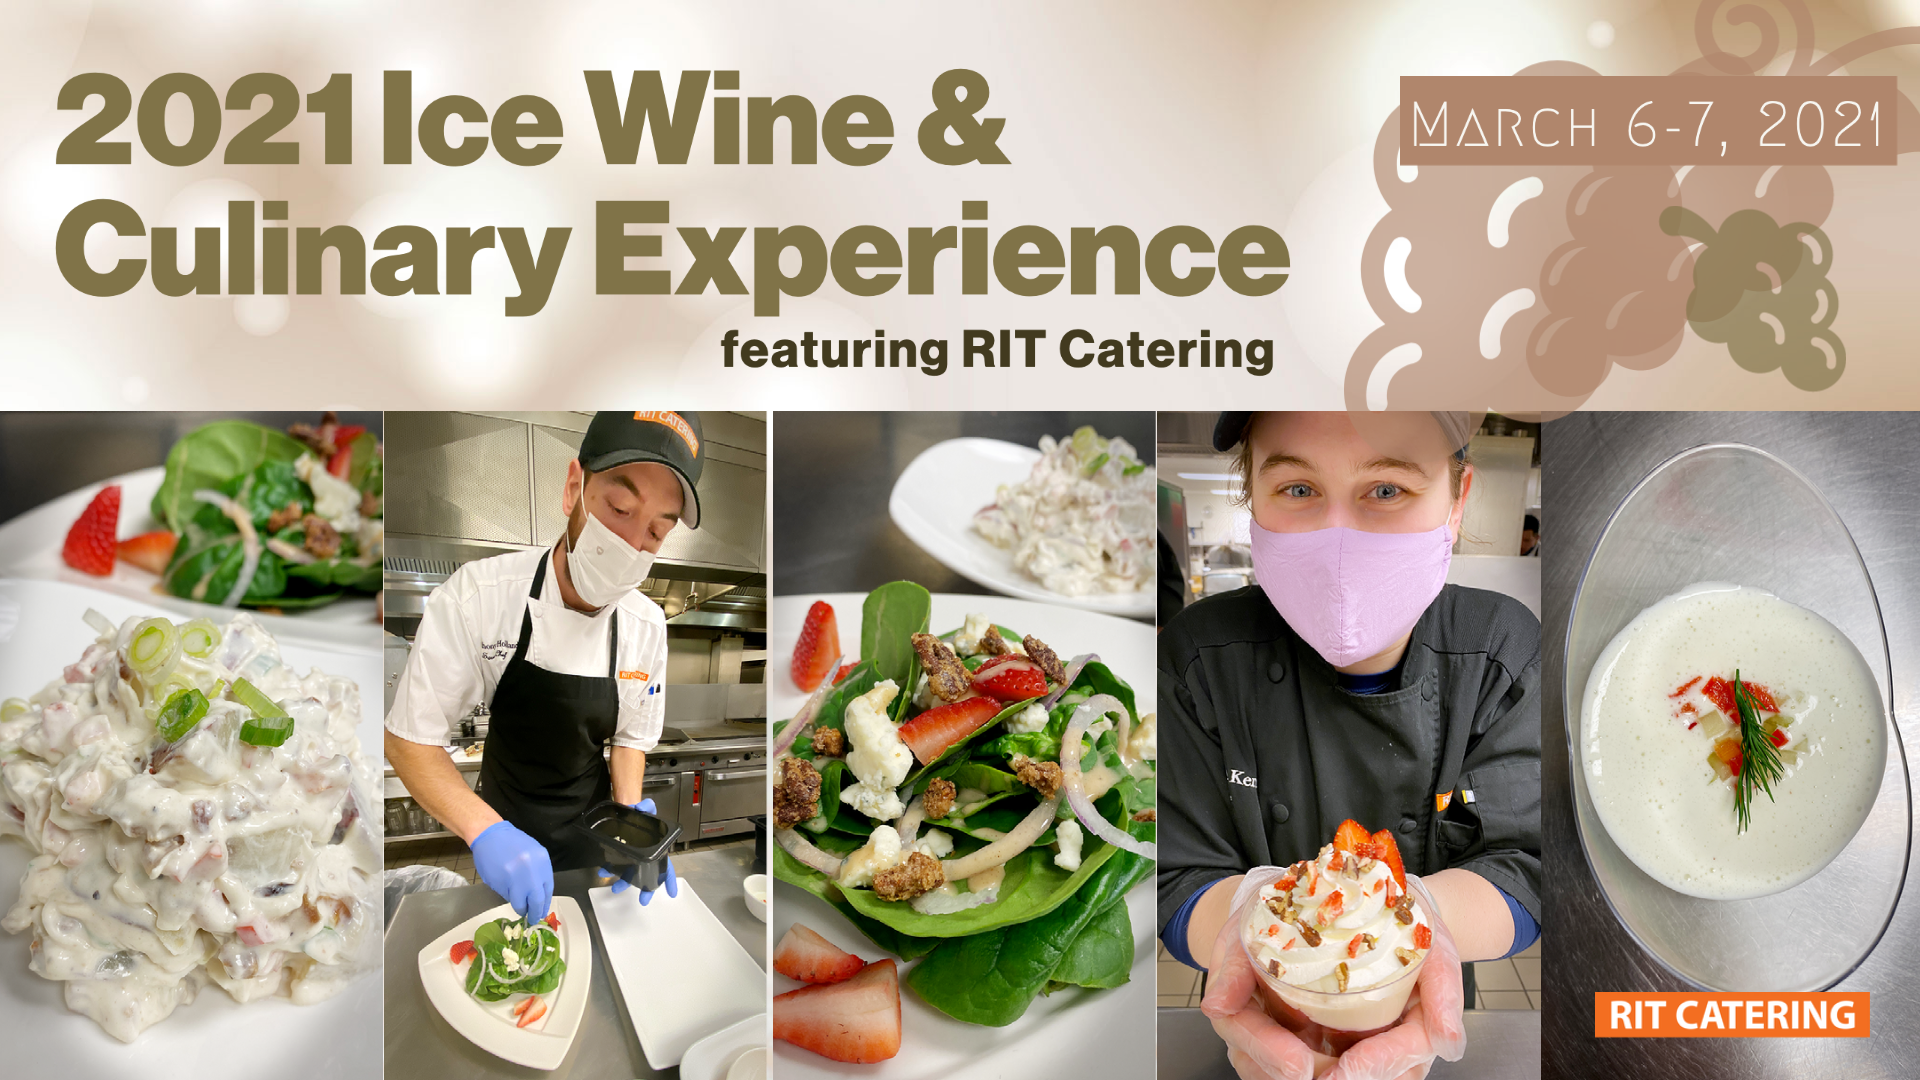 images of ice wine-infused food with text "2021 Ice Wine & Culinary Experience featuring RIT Catering"